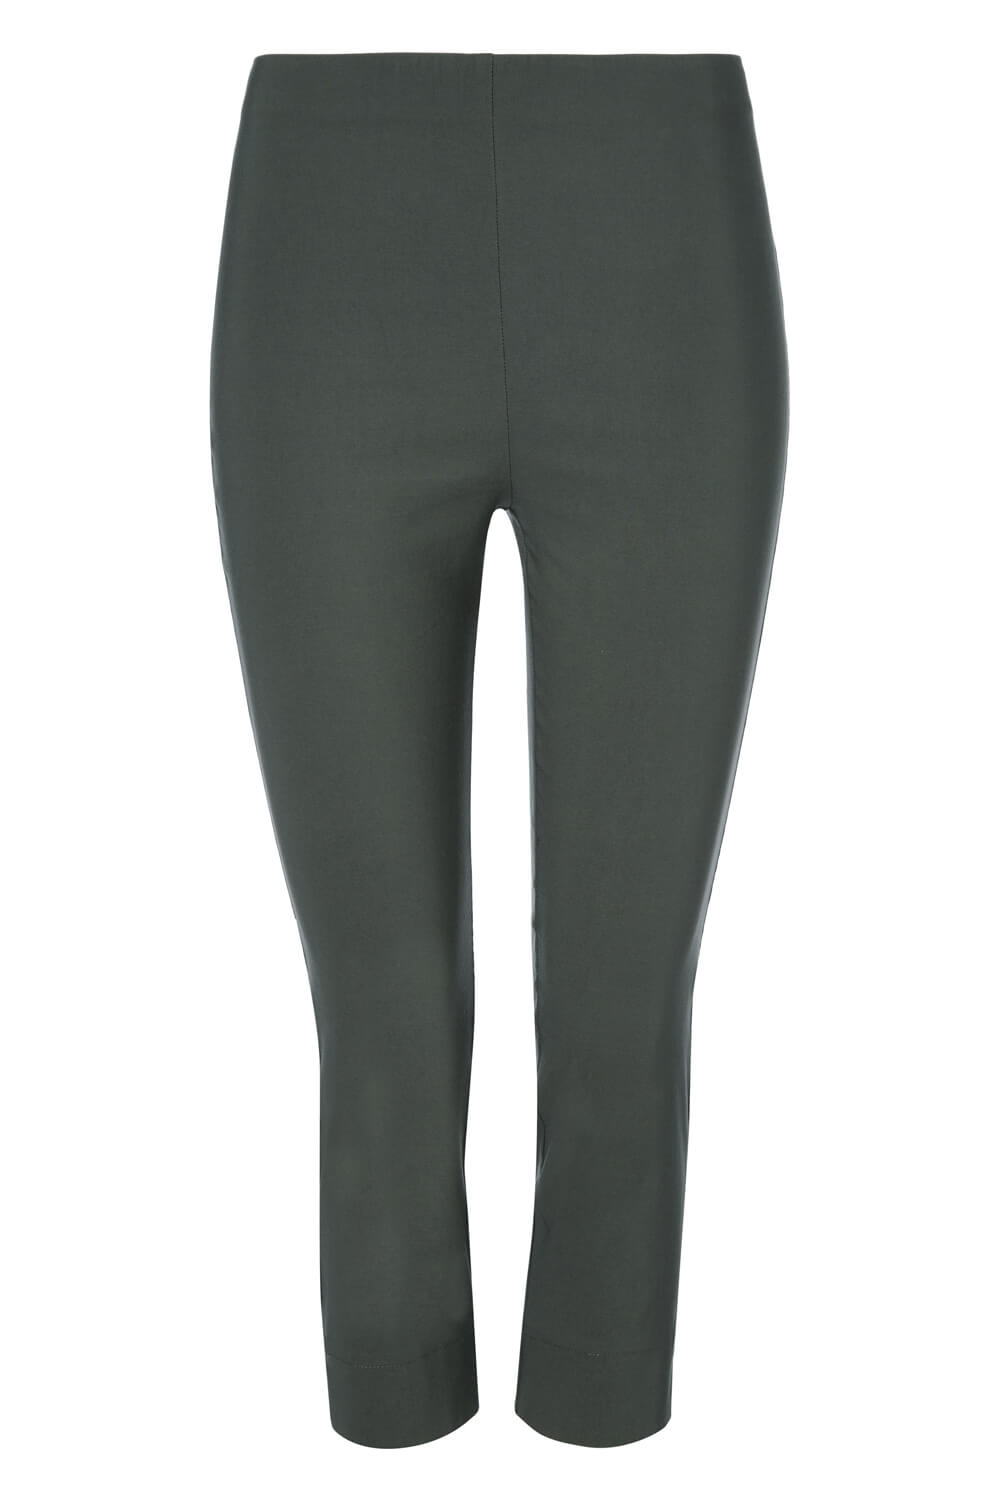 Forrest Cropped Stretch Trouser, Image 4 of 4